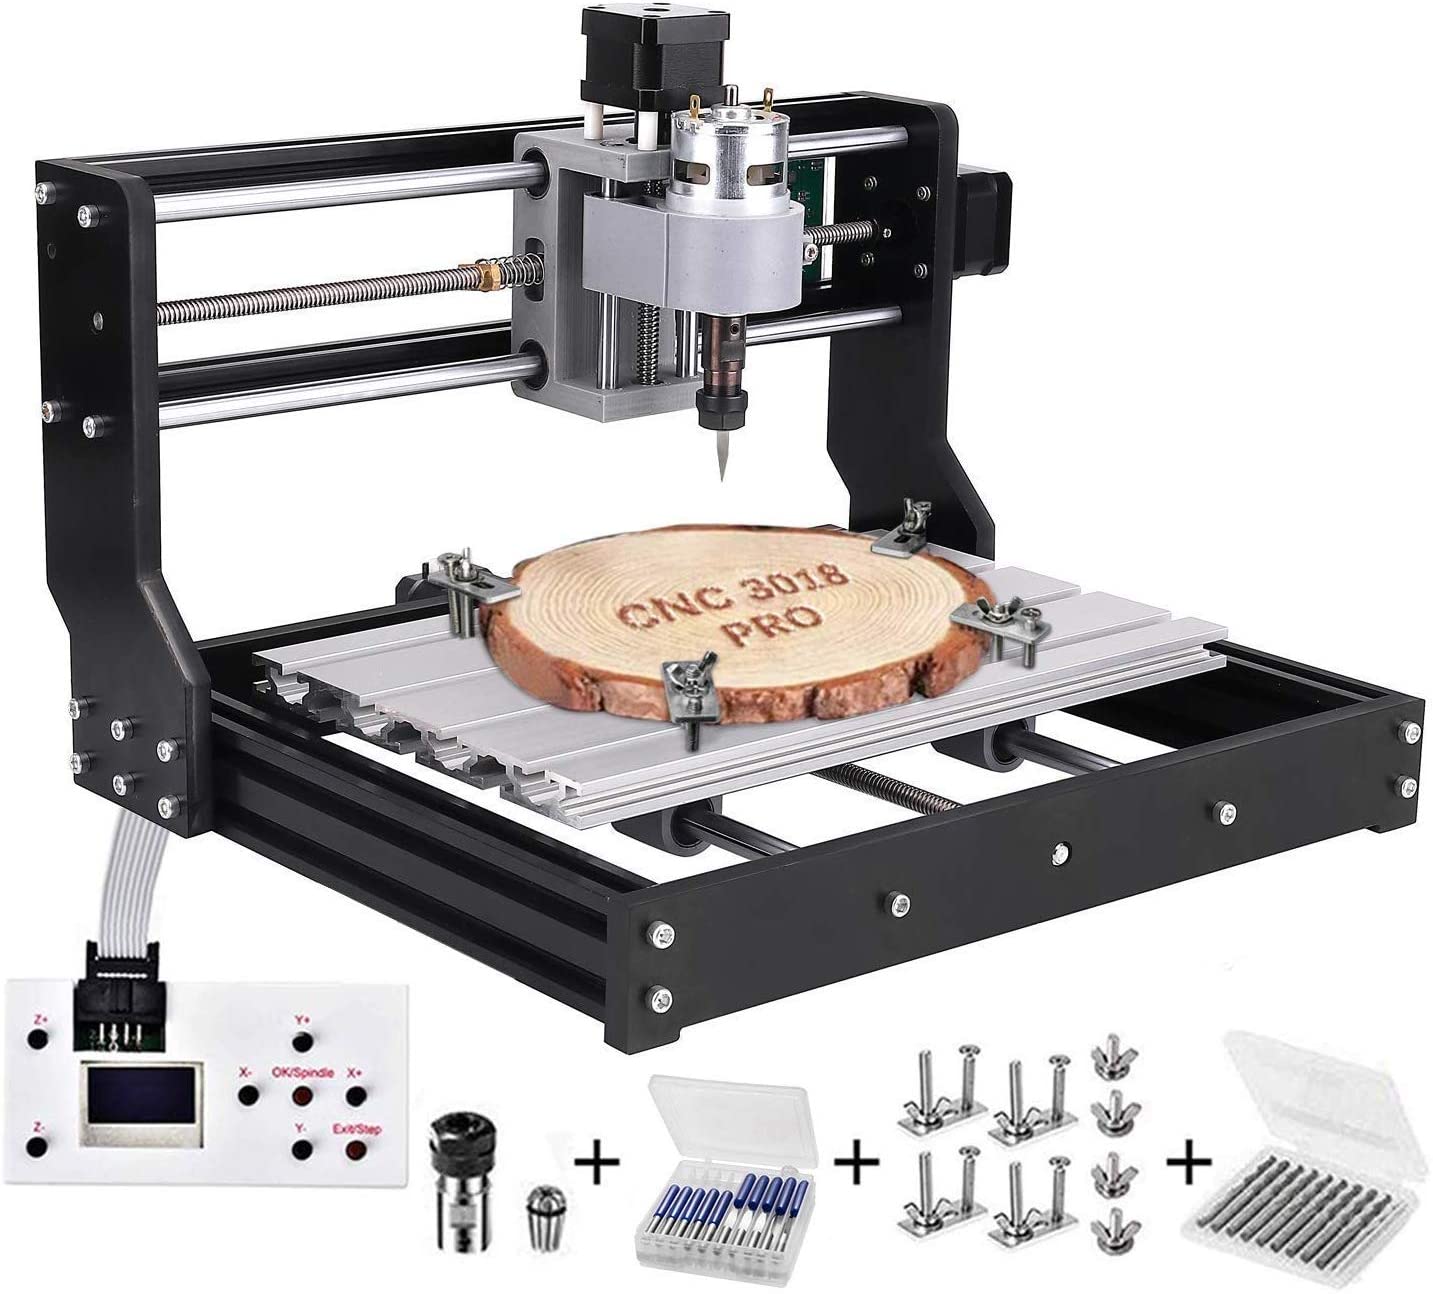 Details about   New CNC 3018 Pro DIY 3 Axis Milling Cutter Machine Wood Router Engraver Kits USA 